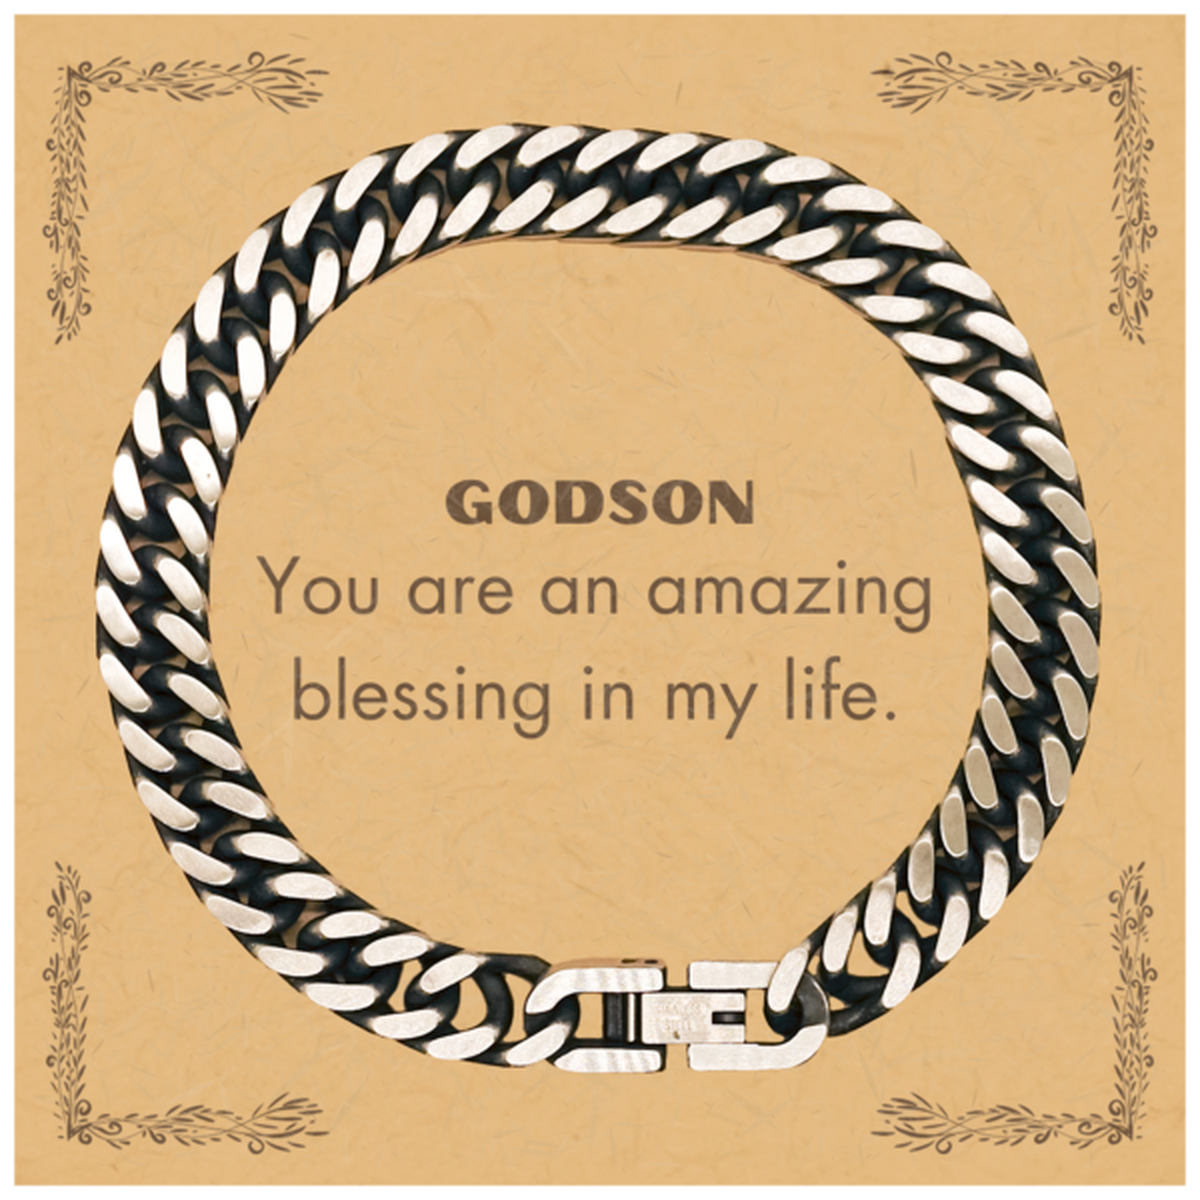 Godson Cuban Link Chain Bracelet, You are an amazing blessing in my life, Thank You Gifts For Godson, Inspirational Birthday Christmas Unique Gifts For Godson